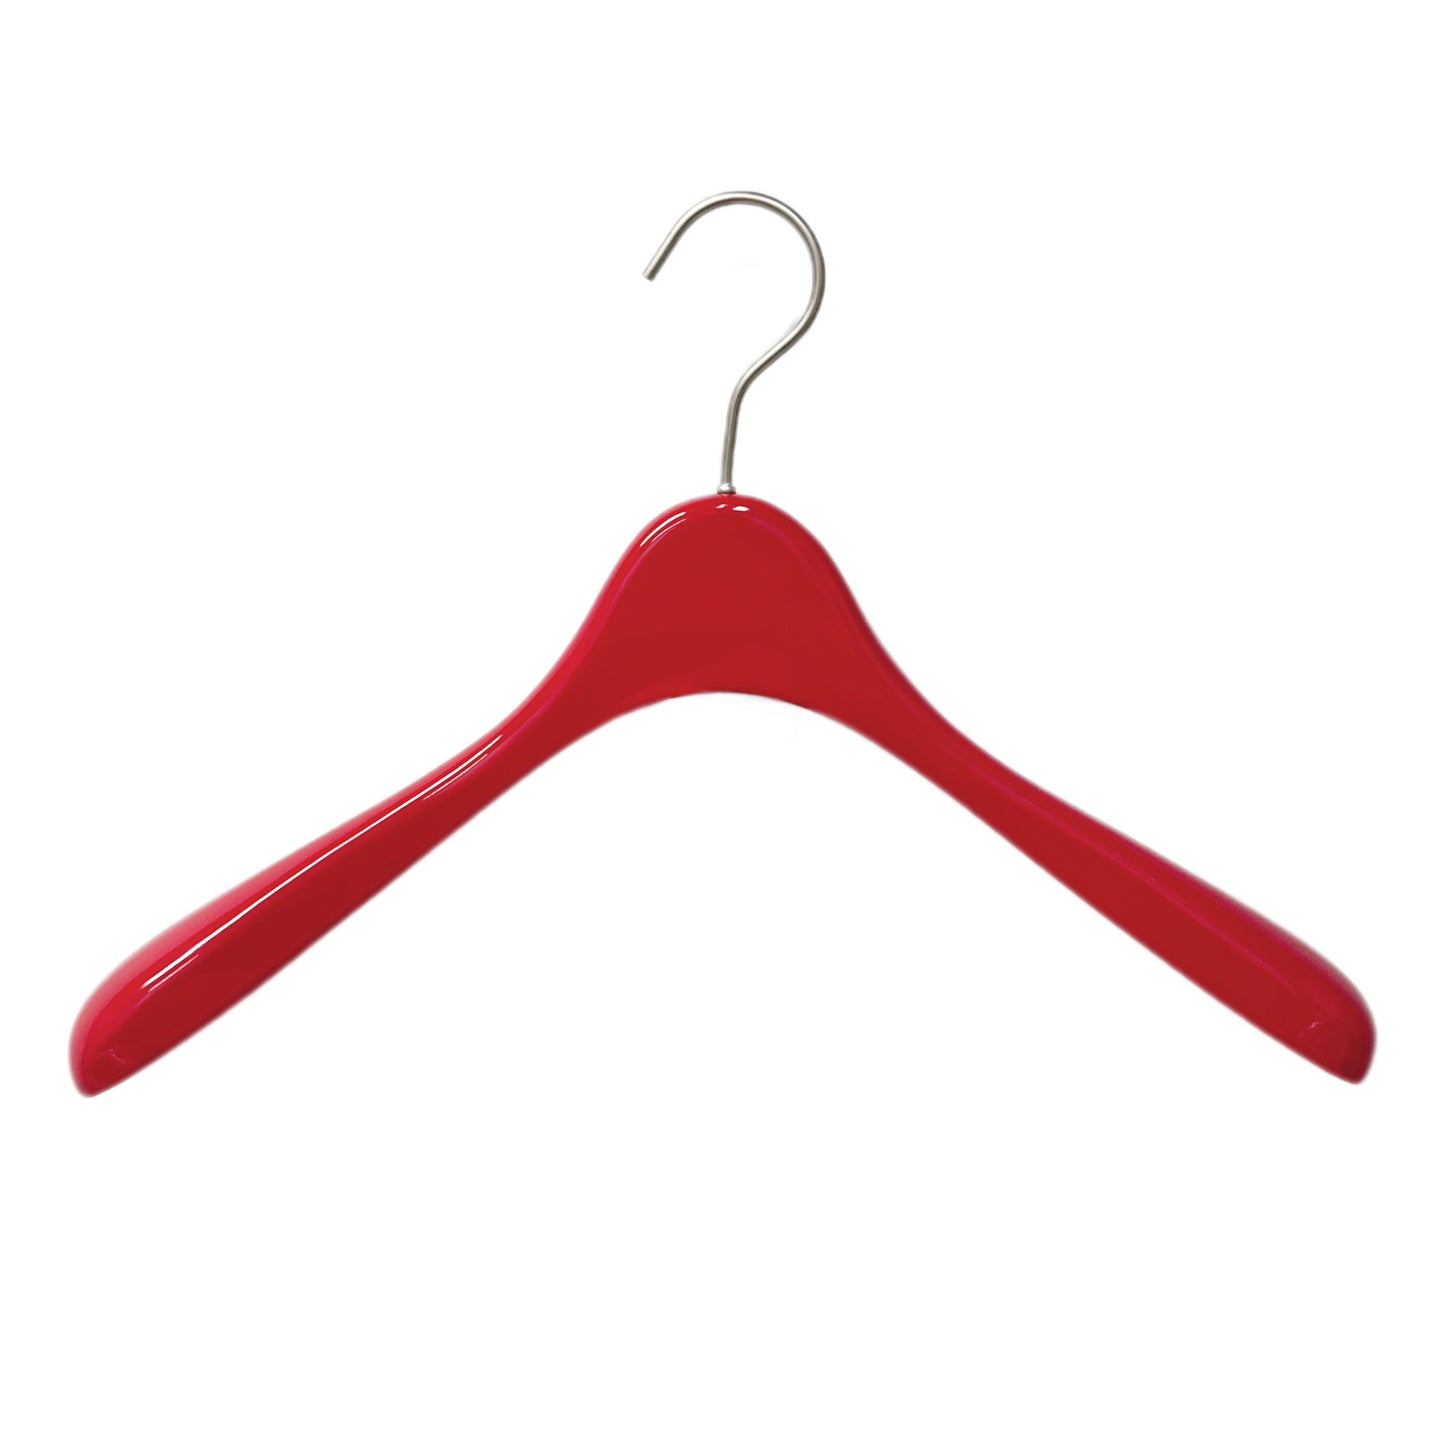 Jelimate Nordic Modern Hotel Luxury Wooden Clothing Hanger,Clothing Store Glossy Red Wood Clip Hanger,Suit Pant Garment Display Adult Wooden Hangers